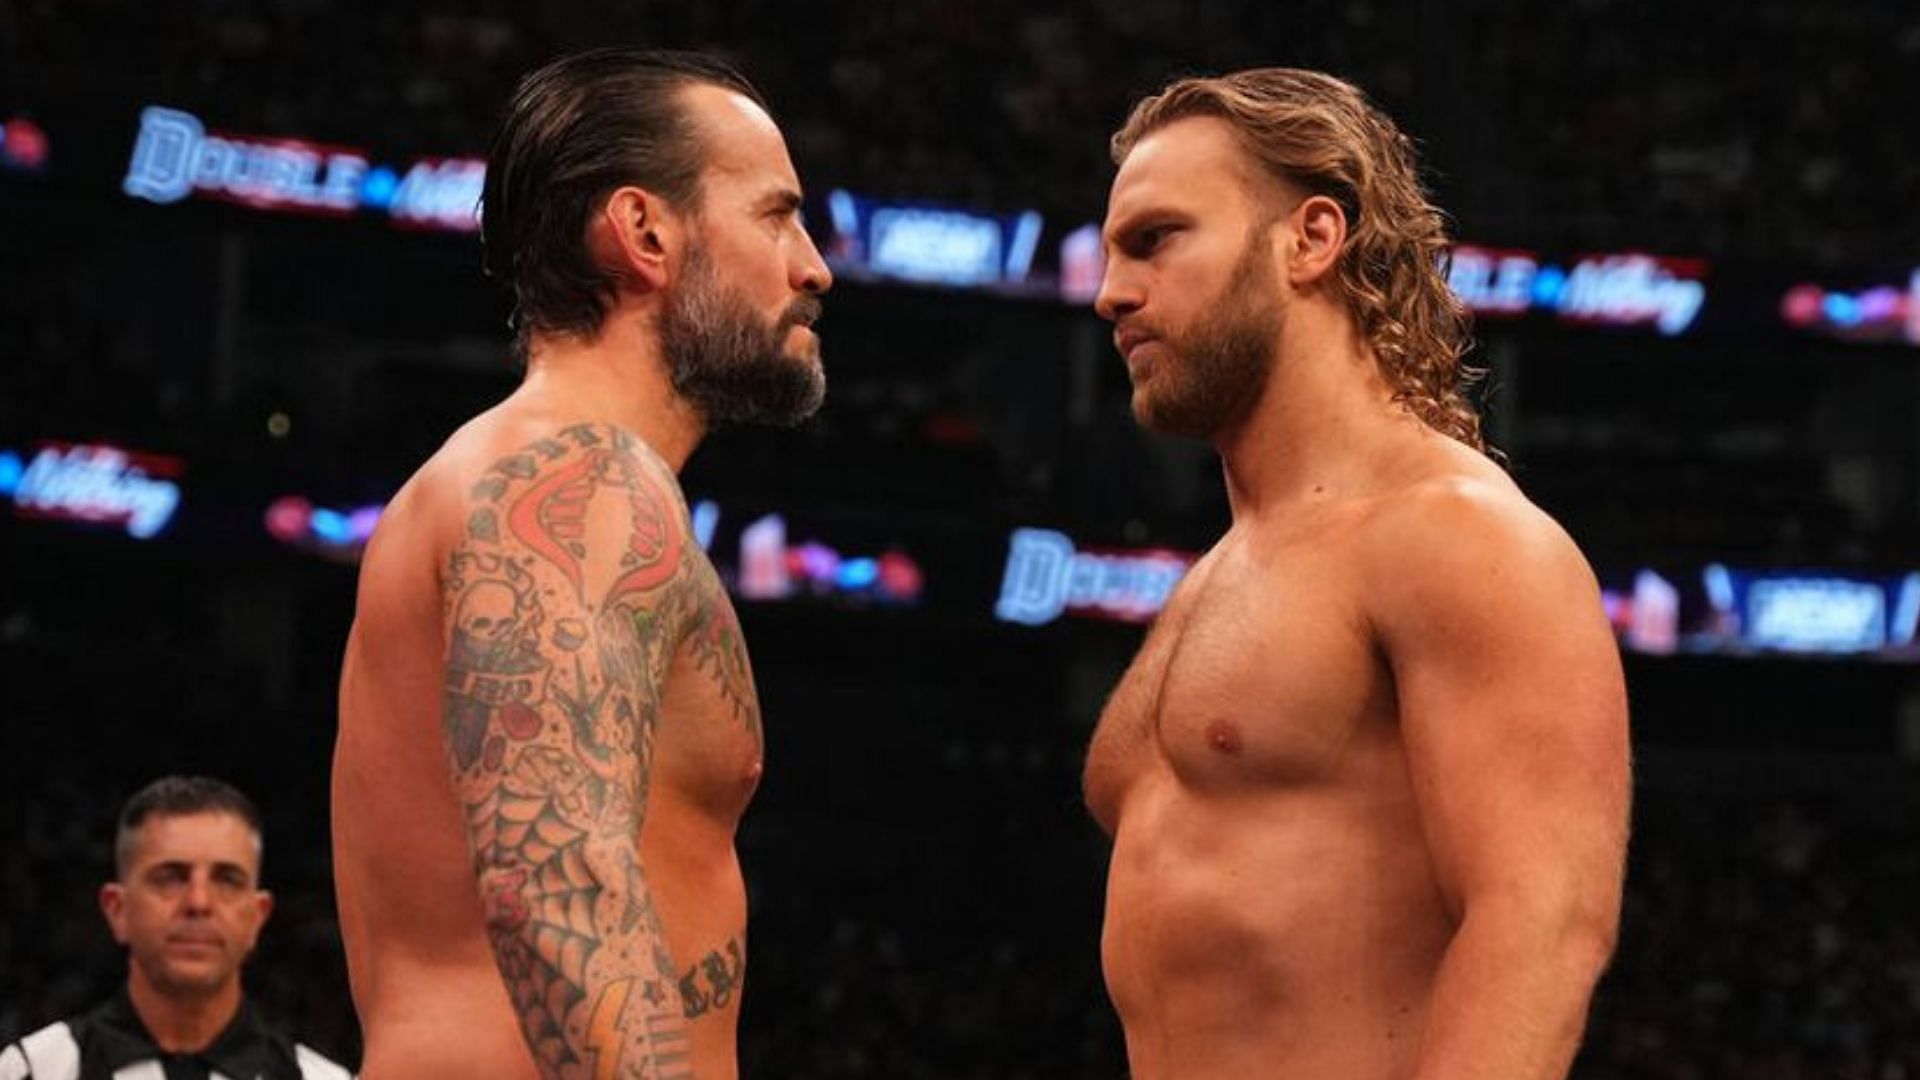 Could this be the real story behind the beef between CM Punk and Hangman Page?